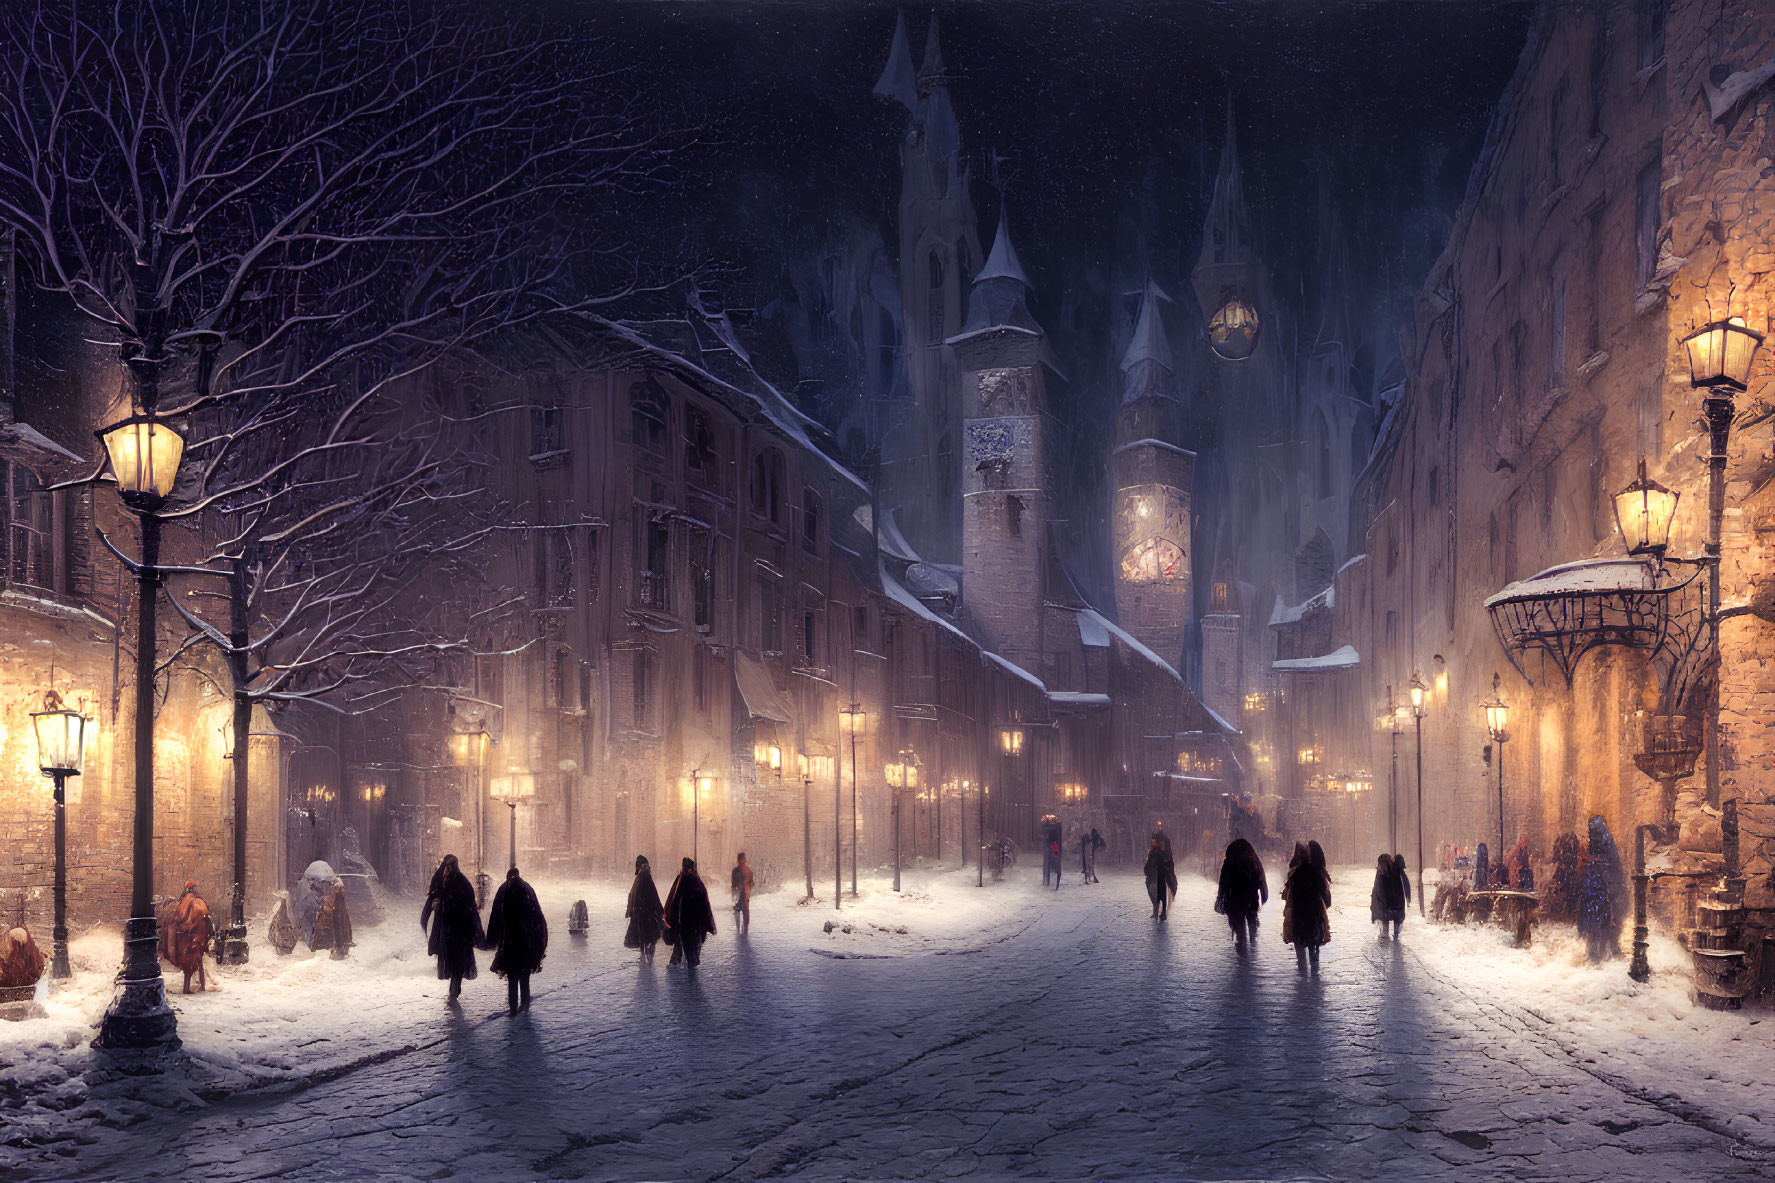 Snowy Evening Scene: People Walking on Cobblestone Street with Glowing Lamps & Historic Buildings